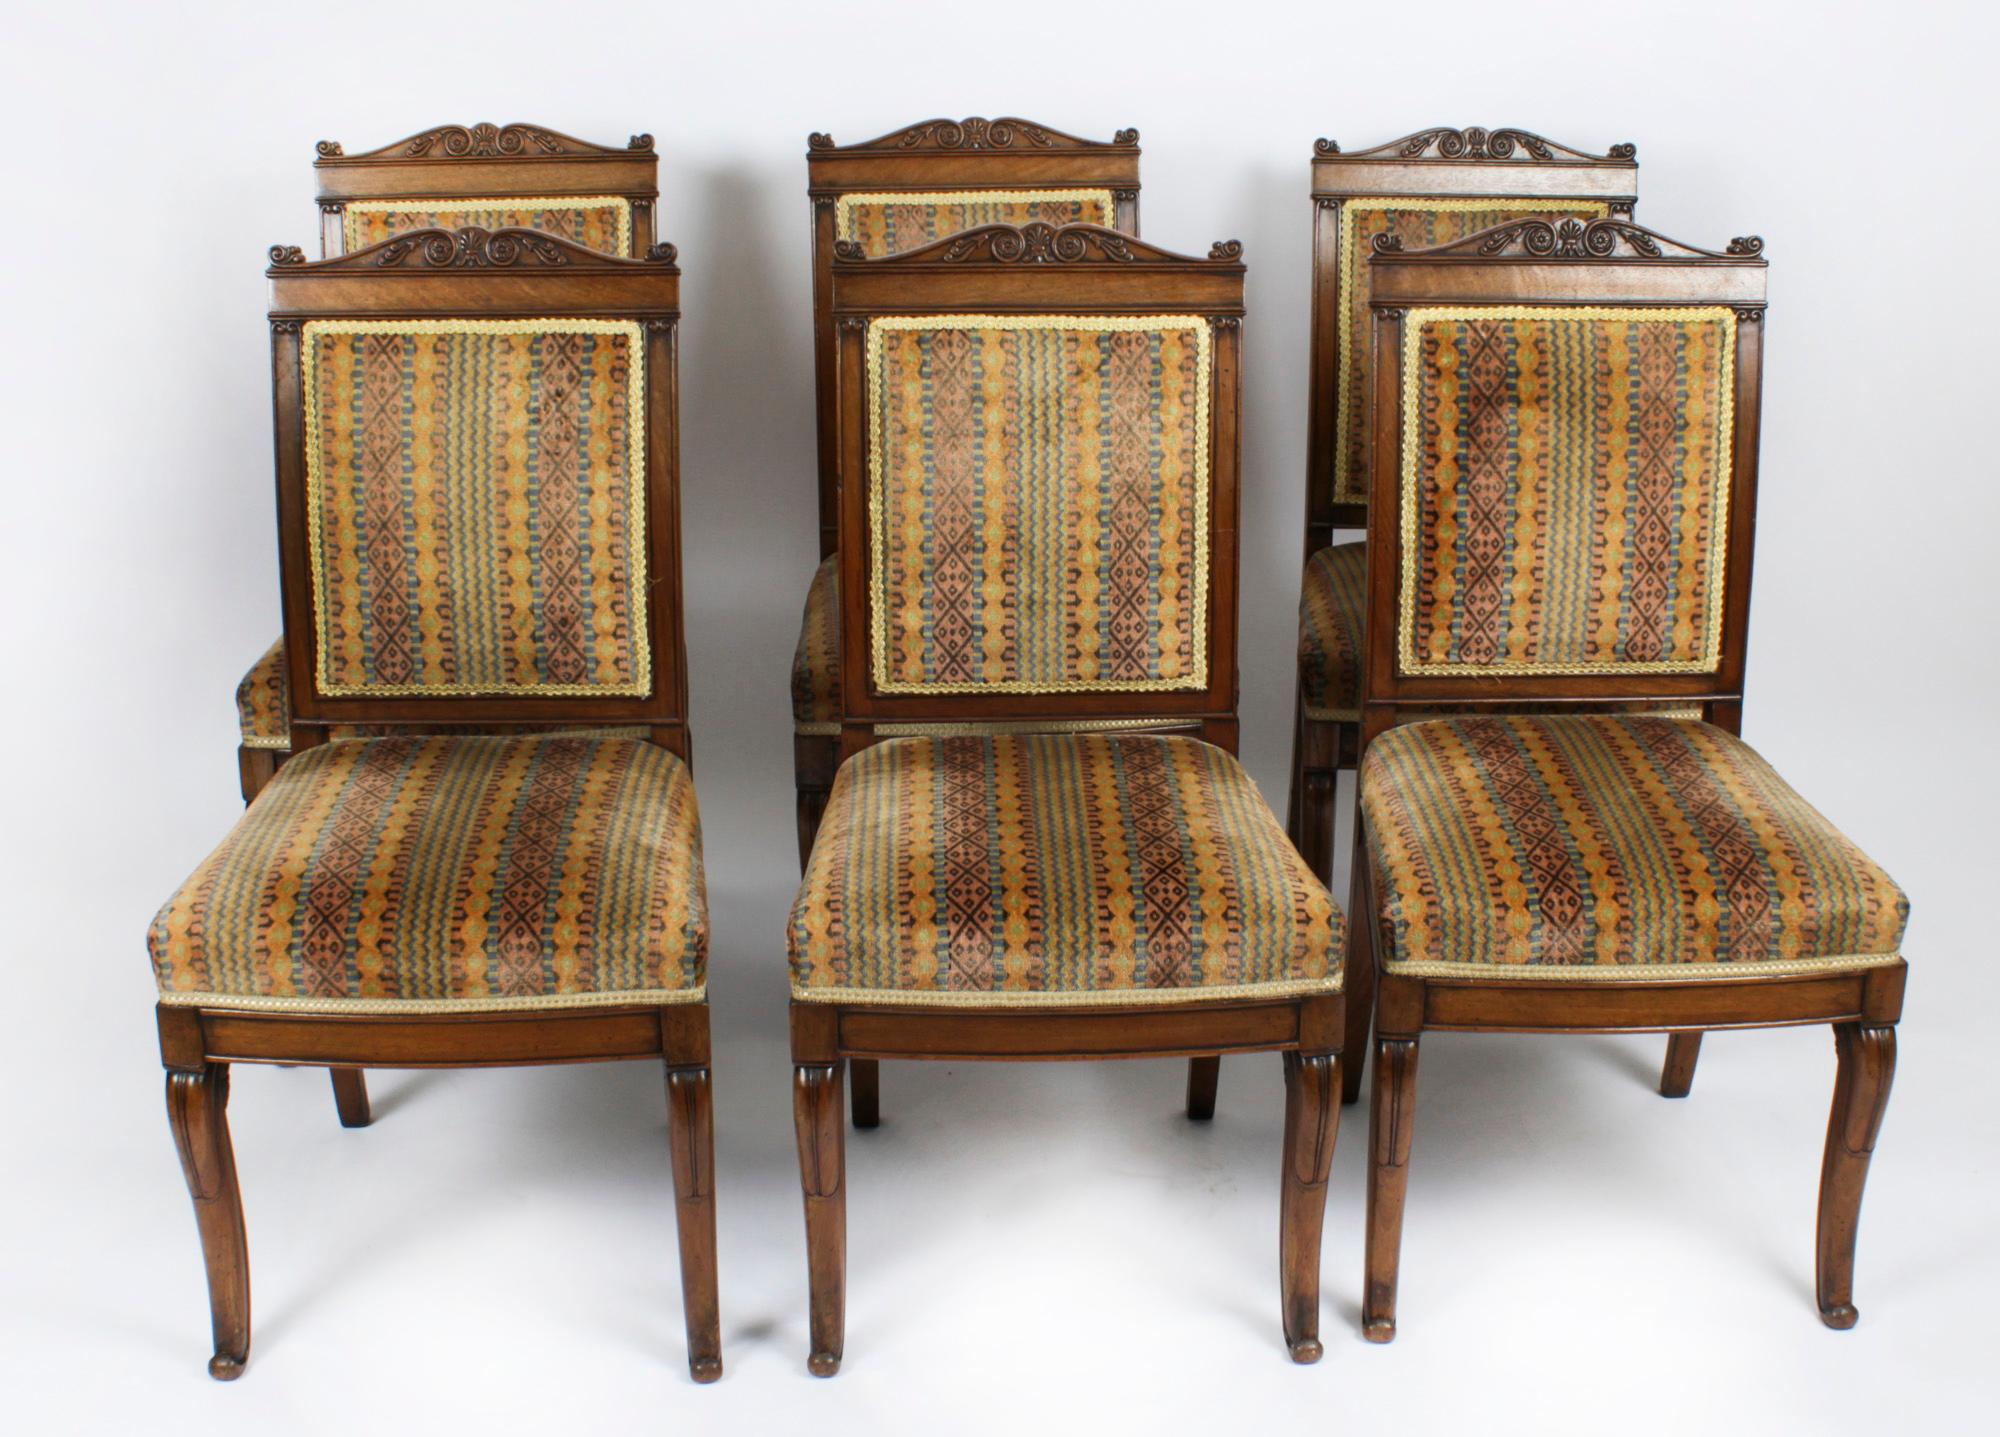 Antique Set of 6 French Empire Dining Chairs 19th Century 8